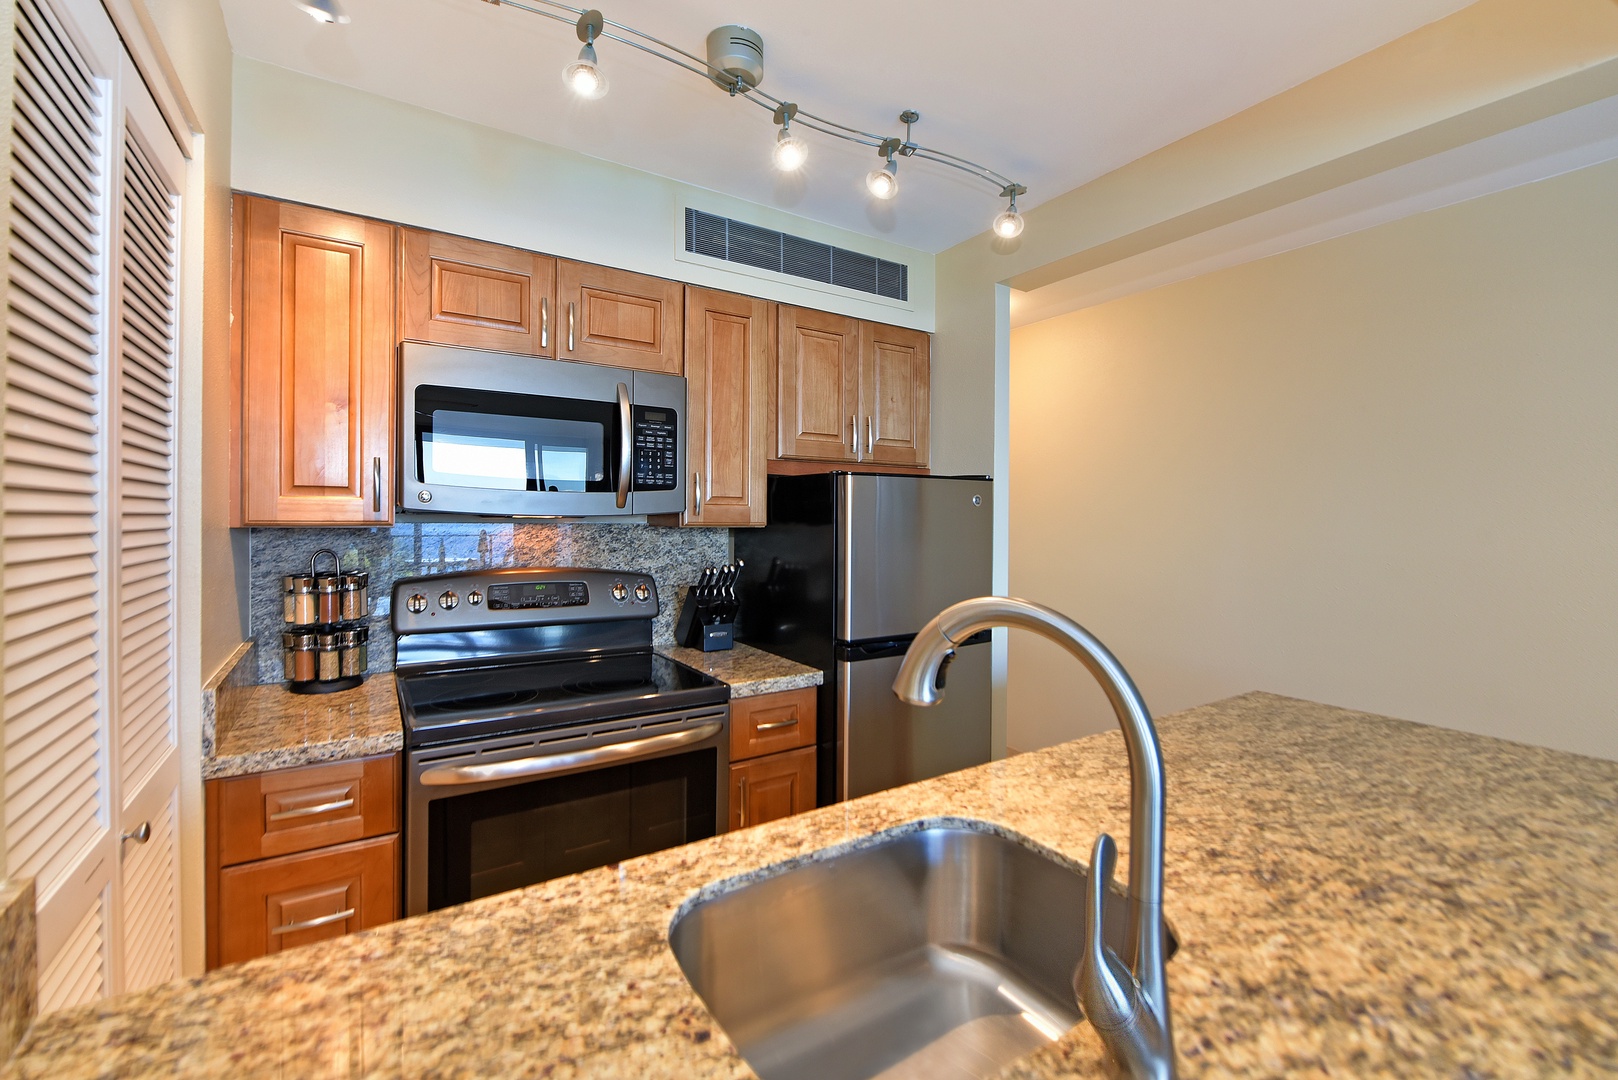 Create culinary delights in the fully equipped kitchen